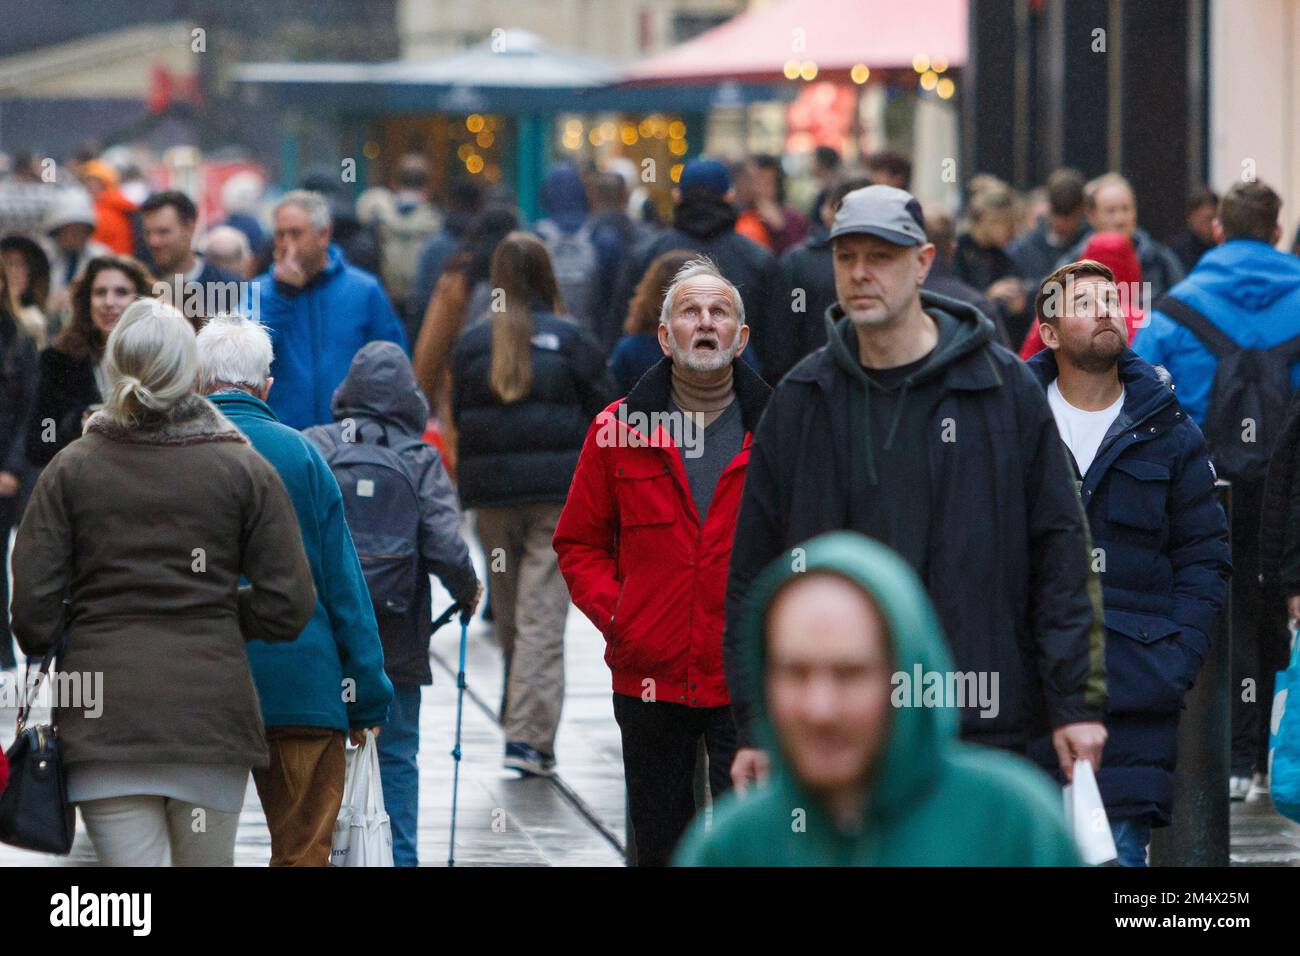 Bath, UK, 23rd Dec, 2022. With only two days left until Christmas day two shoppers doing last minute shopping are pictured in Bath city centre as they react to the christmas light display in the shopping centre. Many shops have tried to attract customers by starting their sales early.  Credit: Lynchpics/Alamy Live News Stock Photo